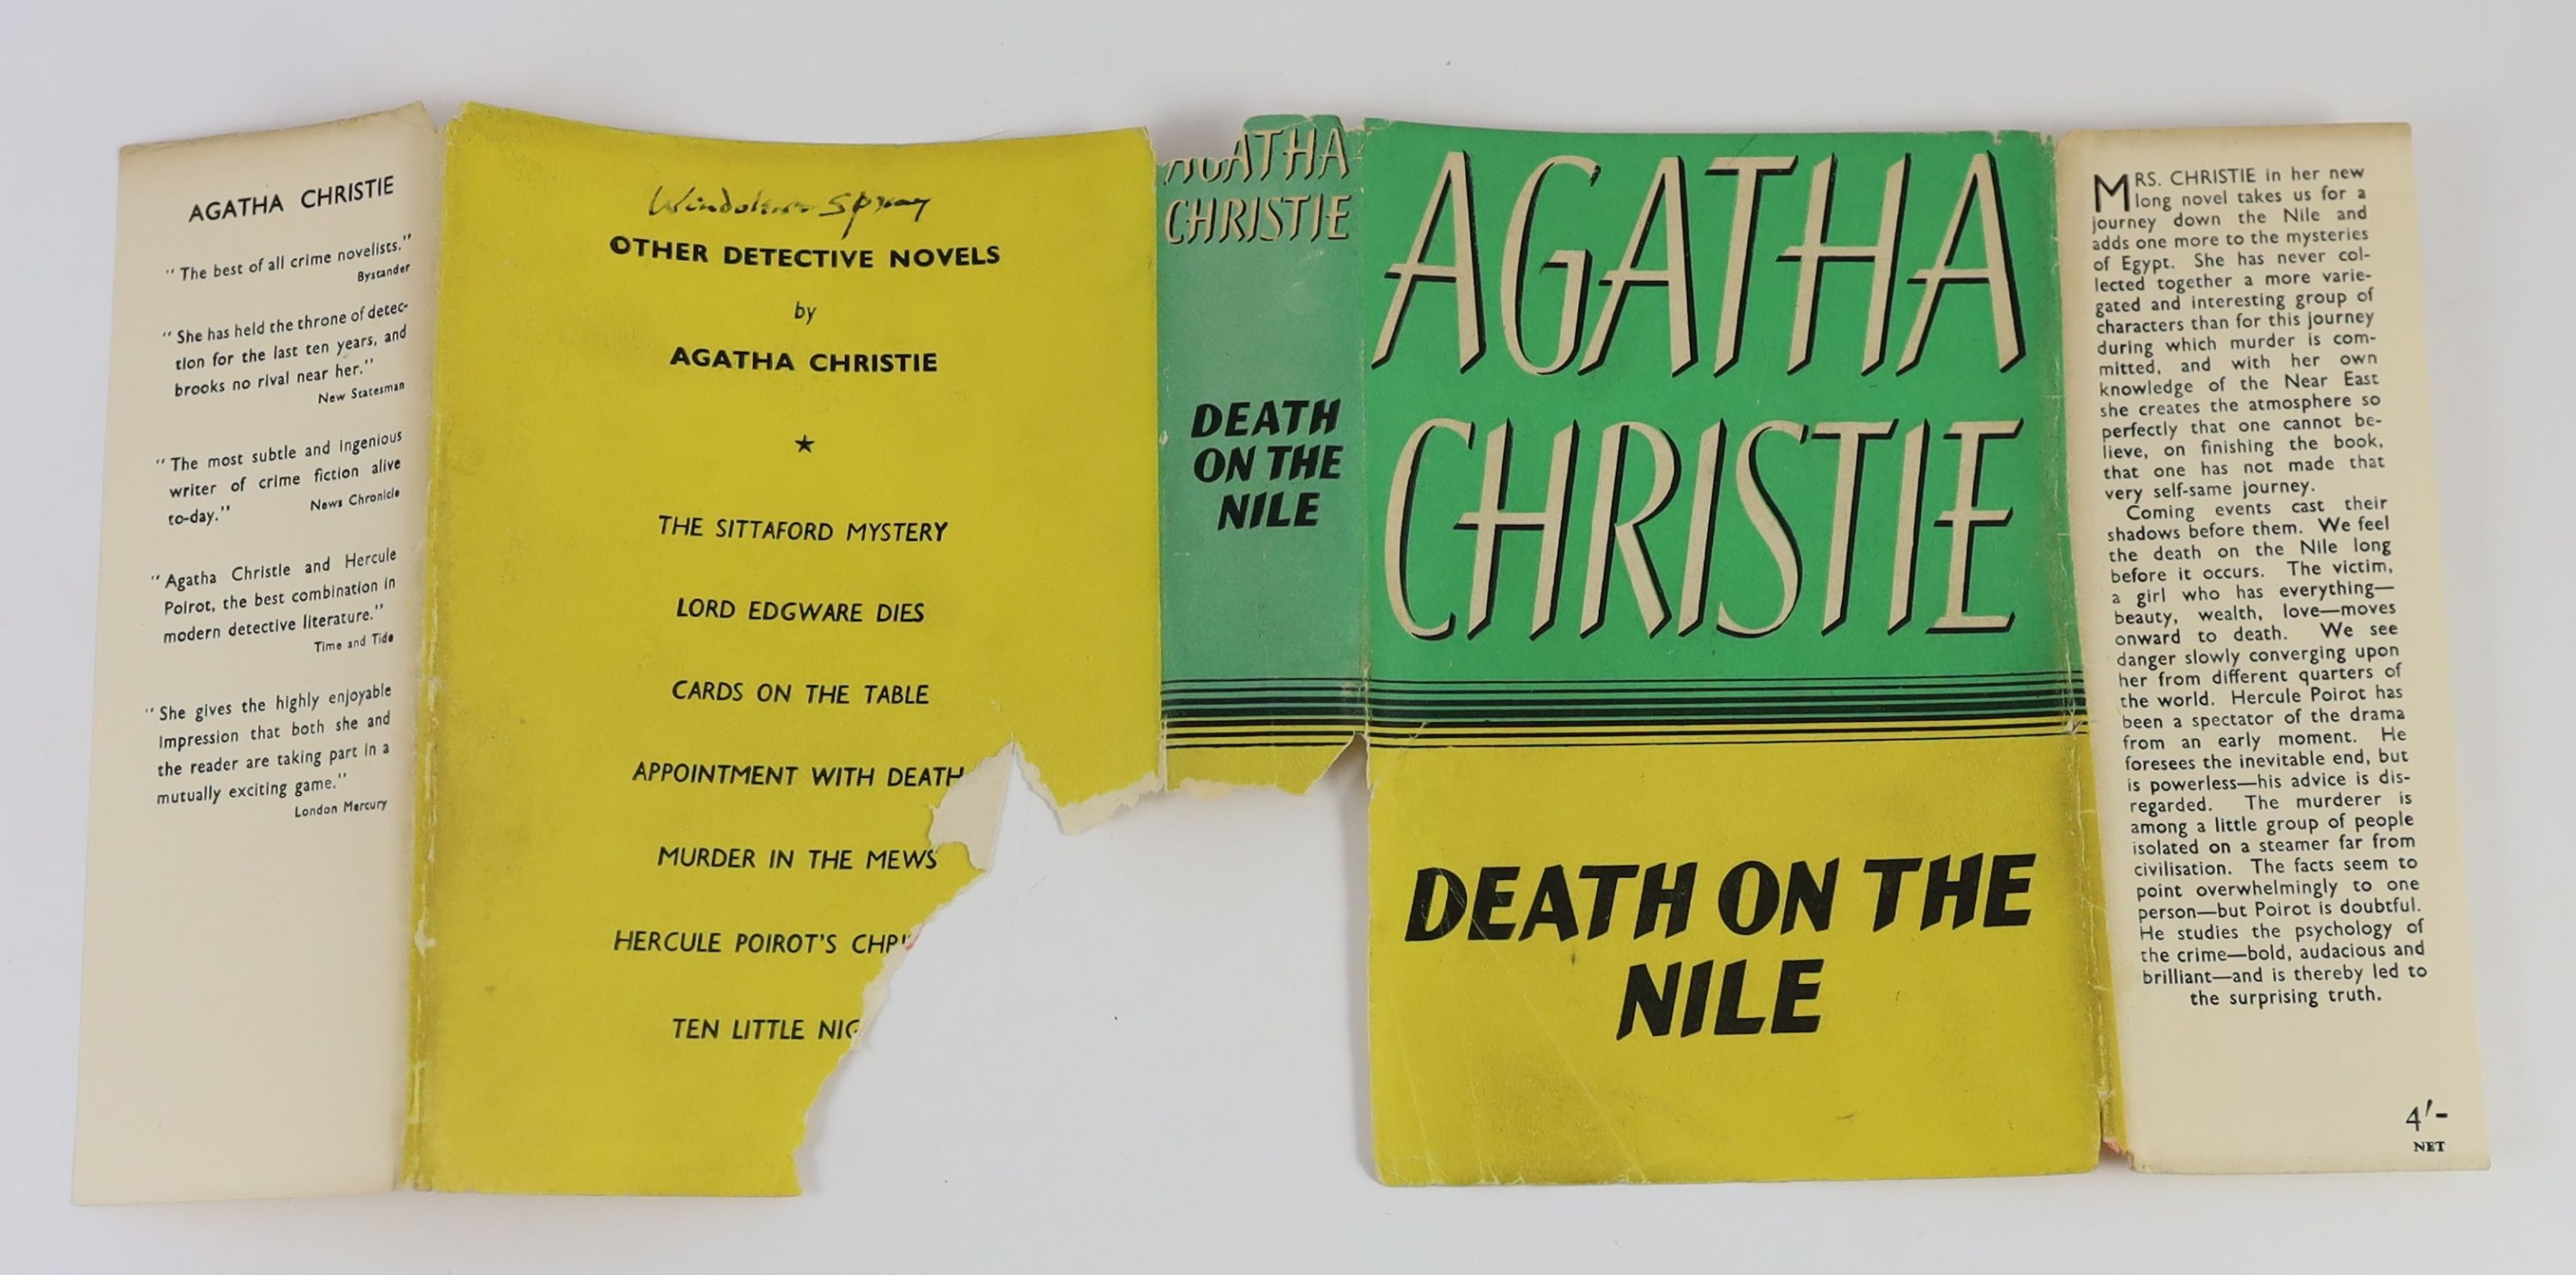 Christie, Agatha - 12 works - Partners in Crime, with torn d/j, with loss to spine and lower rear panel, nd, [1929], Death on the Nile, 2nd impression, in unclipped d/j, with loss to lower spine, 1938; Cards on the Table